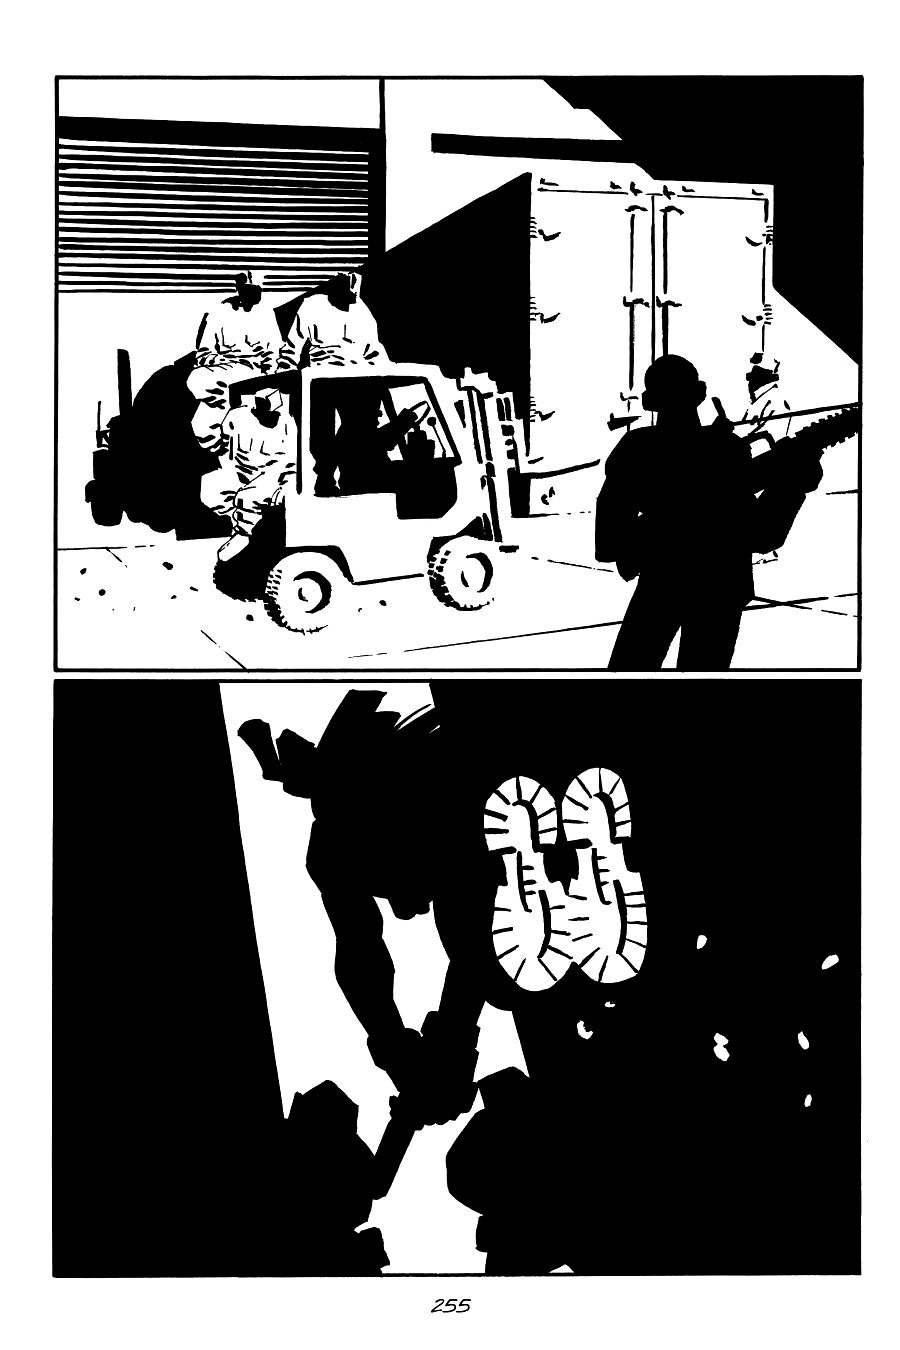 page 255 of sin city 7 hell and back